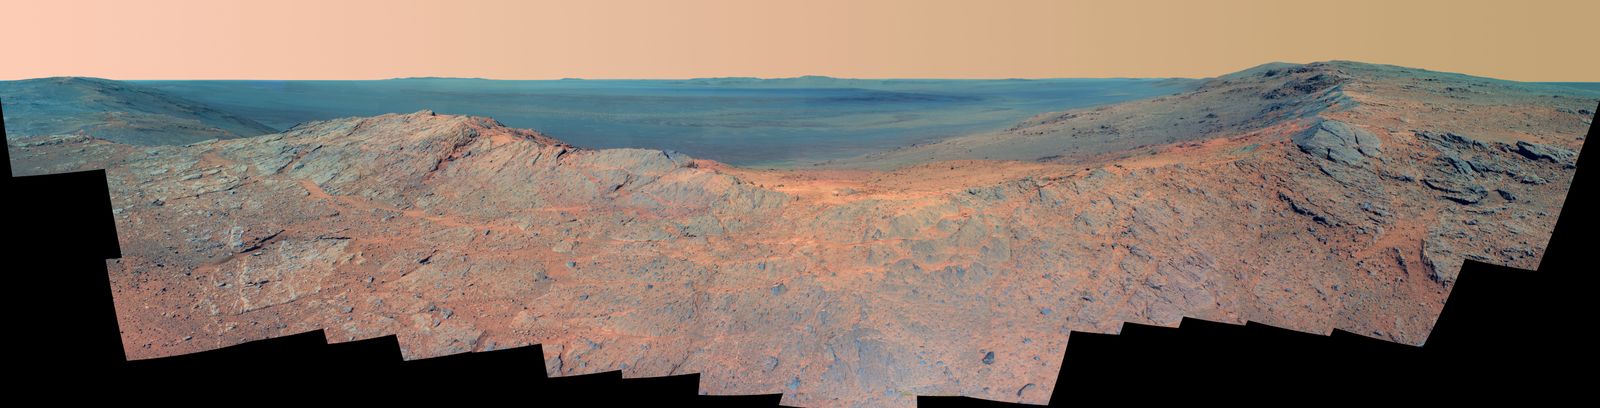 © Alvaro Deprit - NASA's Mars Exploration Rover Opportunity catches "Pillinger Point,"Overlooking Endeavour Crater on Mars (False Color)